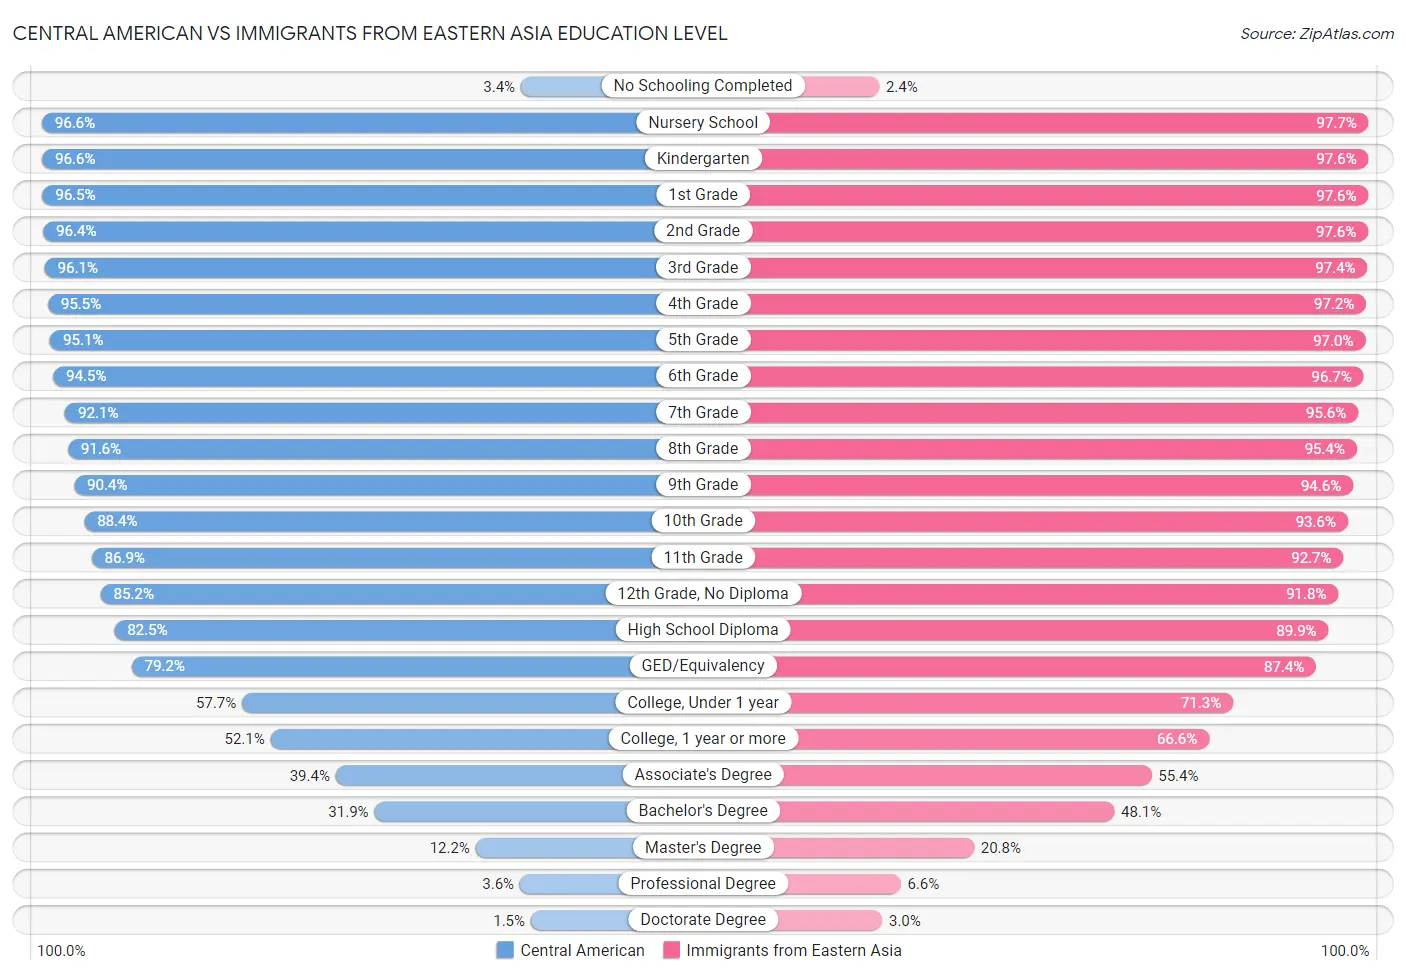 Central American vs Immigrants from Eastern Asia Education Level